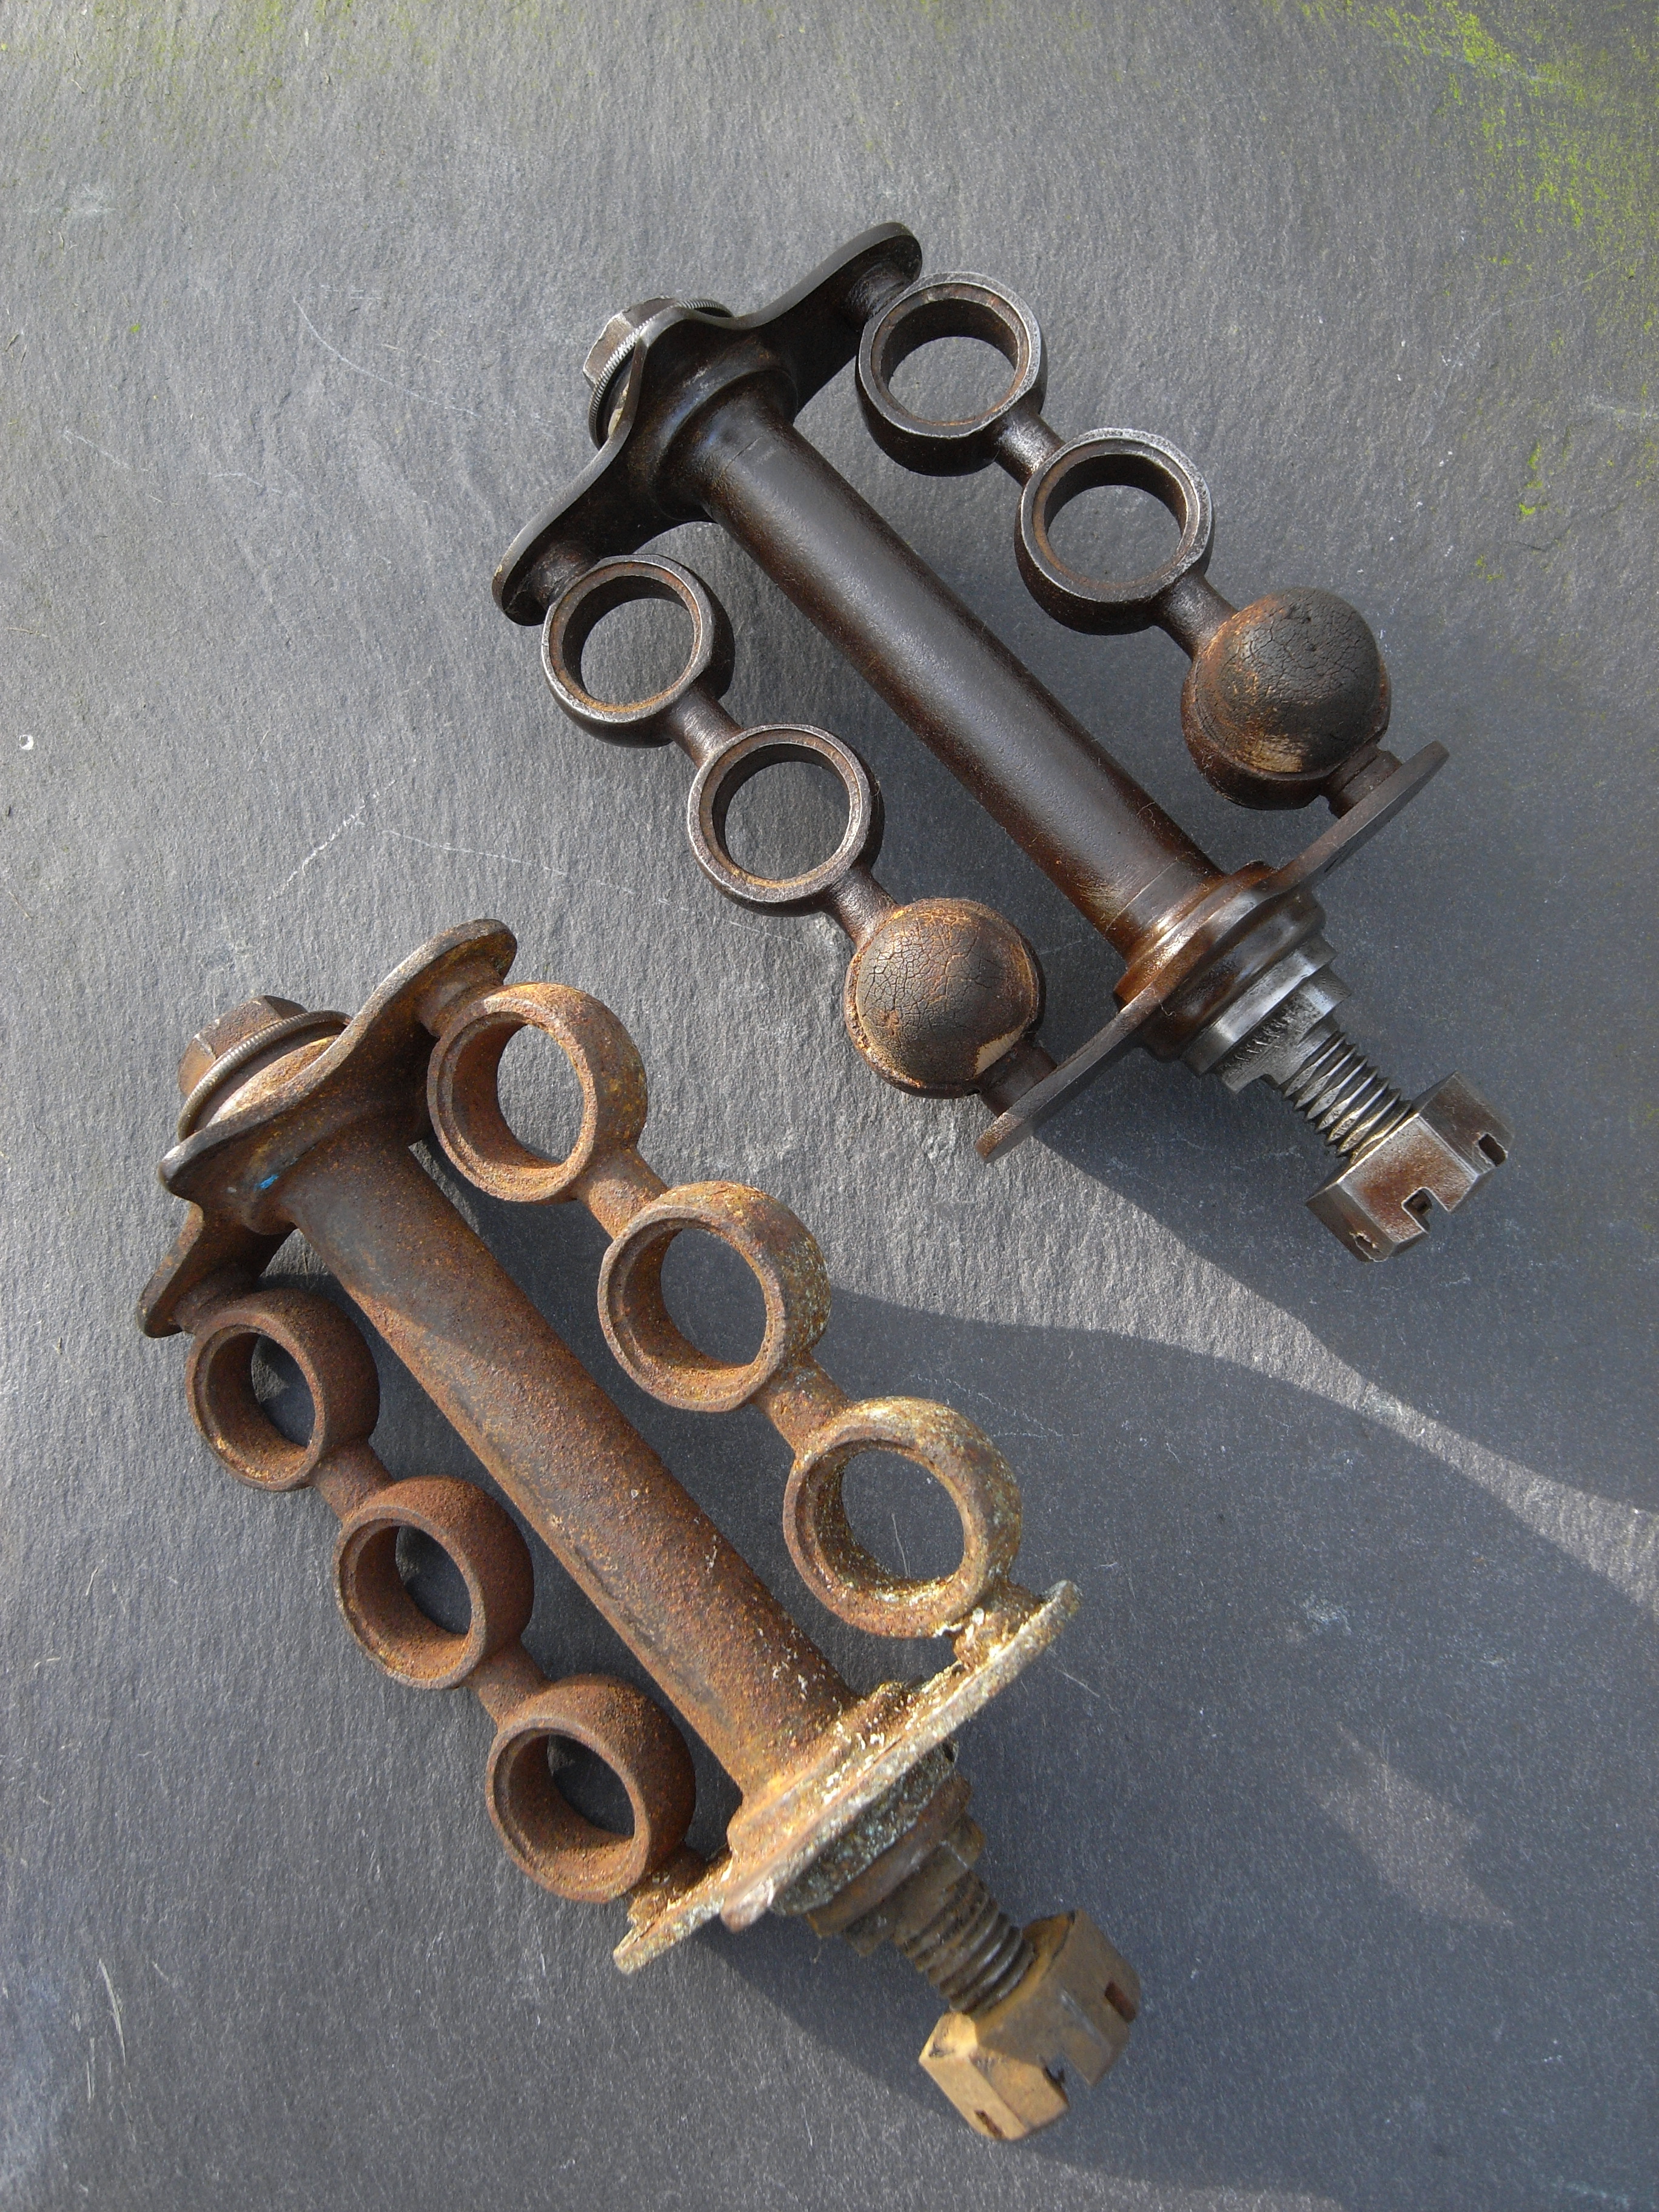 Vintage Bicycle Pedals - Bicycle Modifications